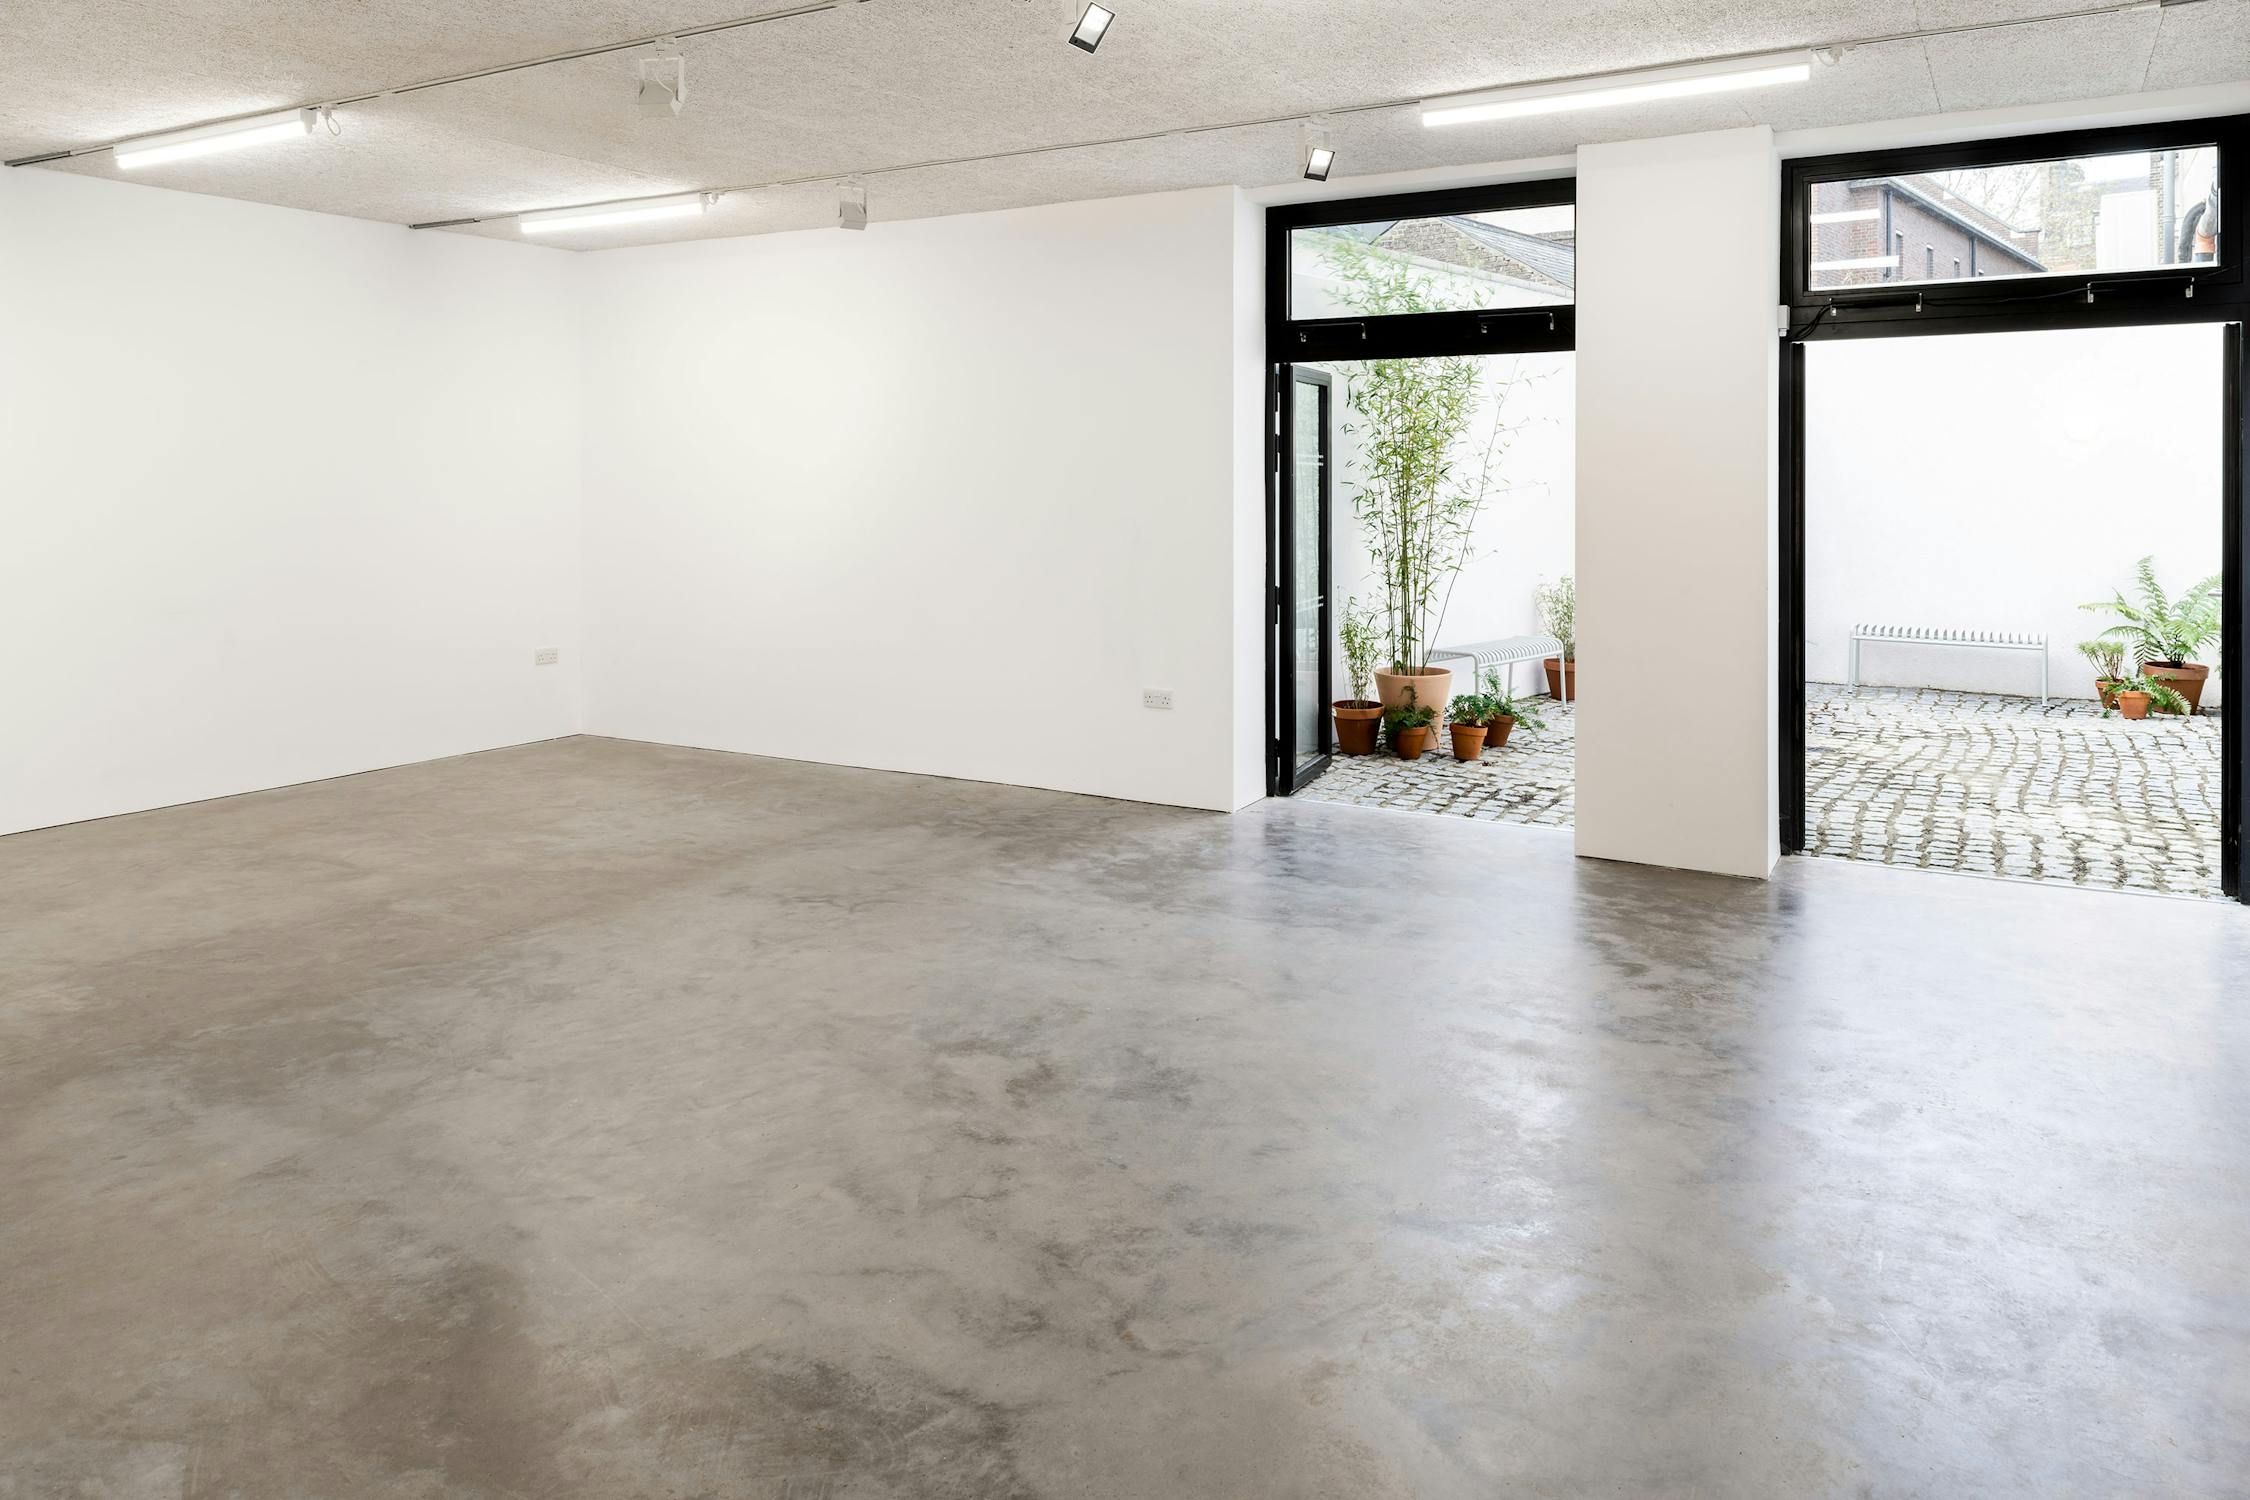 a large empty room with white walls, and a polished concrete floor. Two large doors open onto a paved courtyard